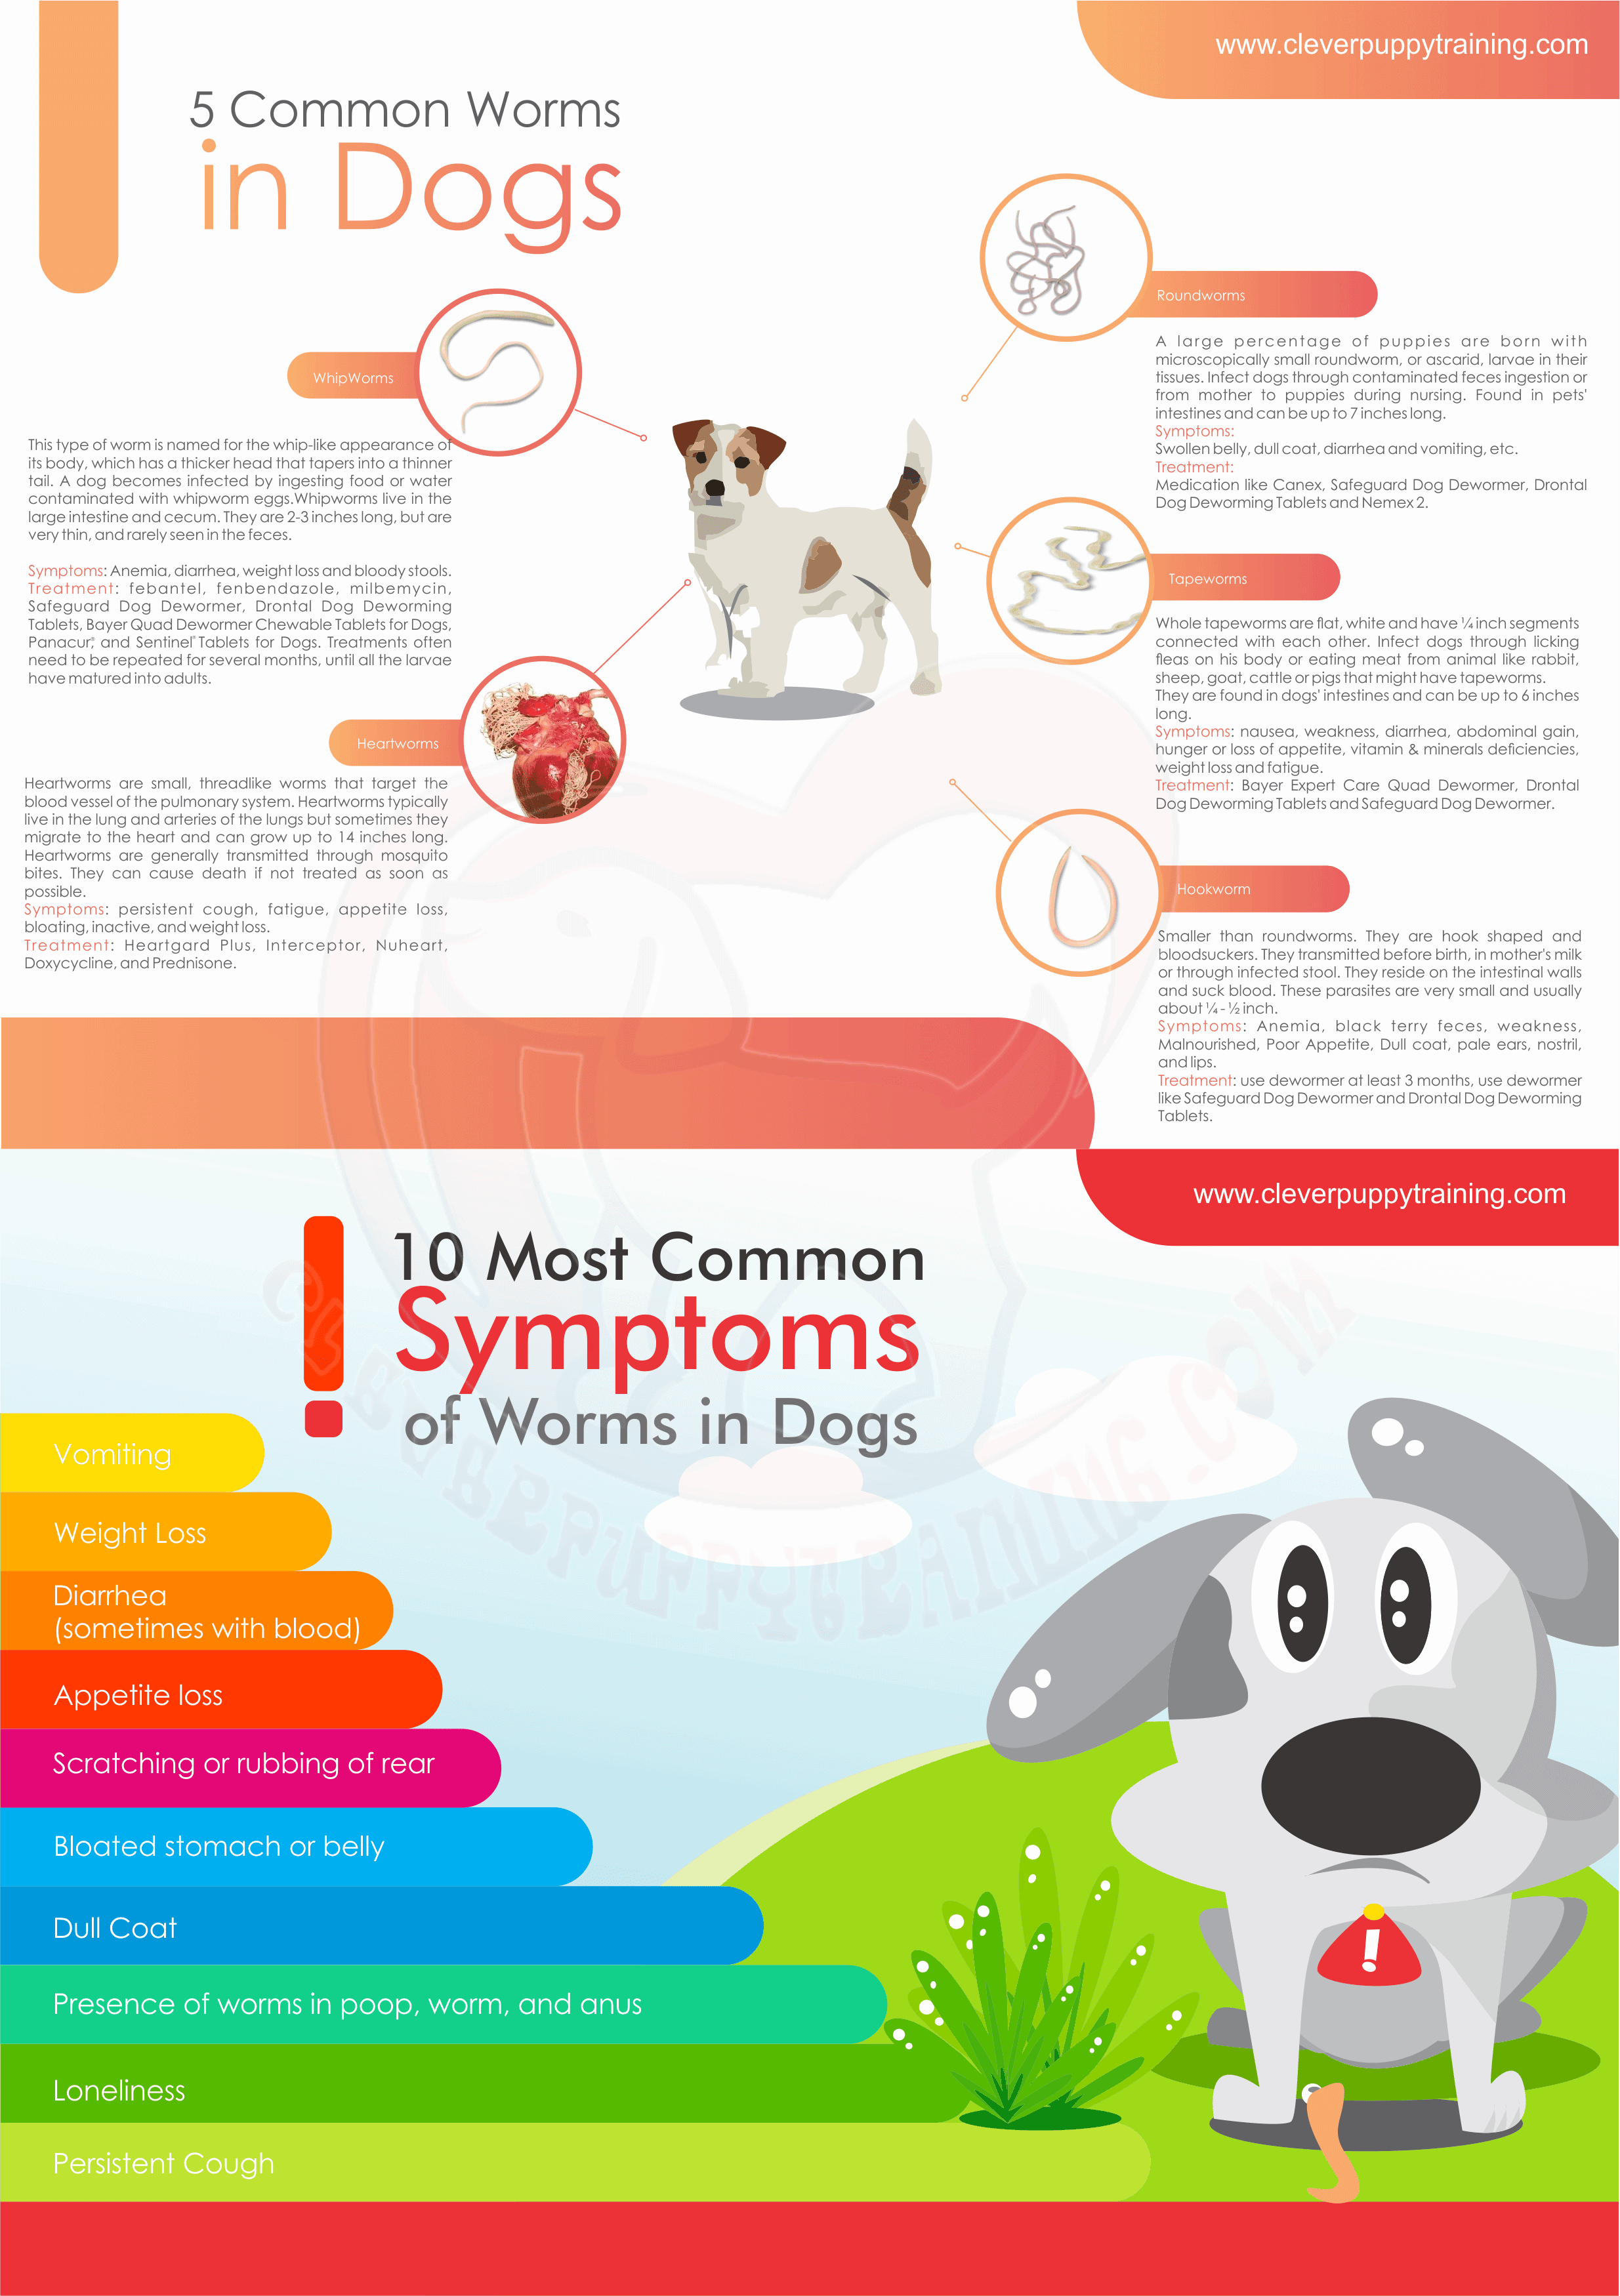 How to Tell if a Puppy has Worms? CleverPuppyTraining